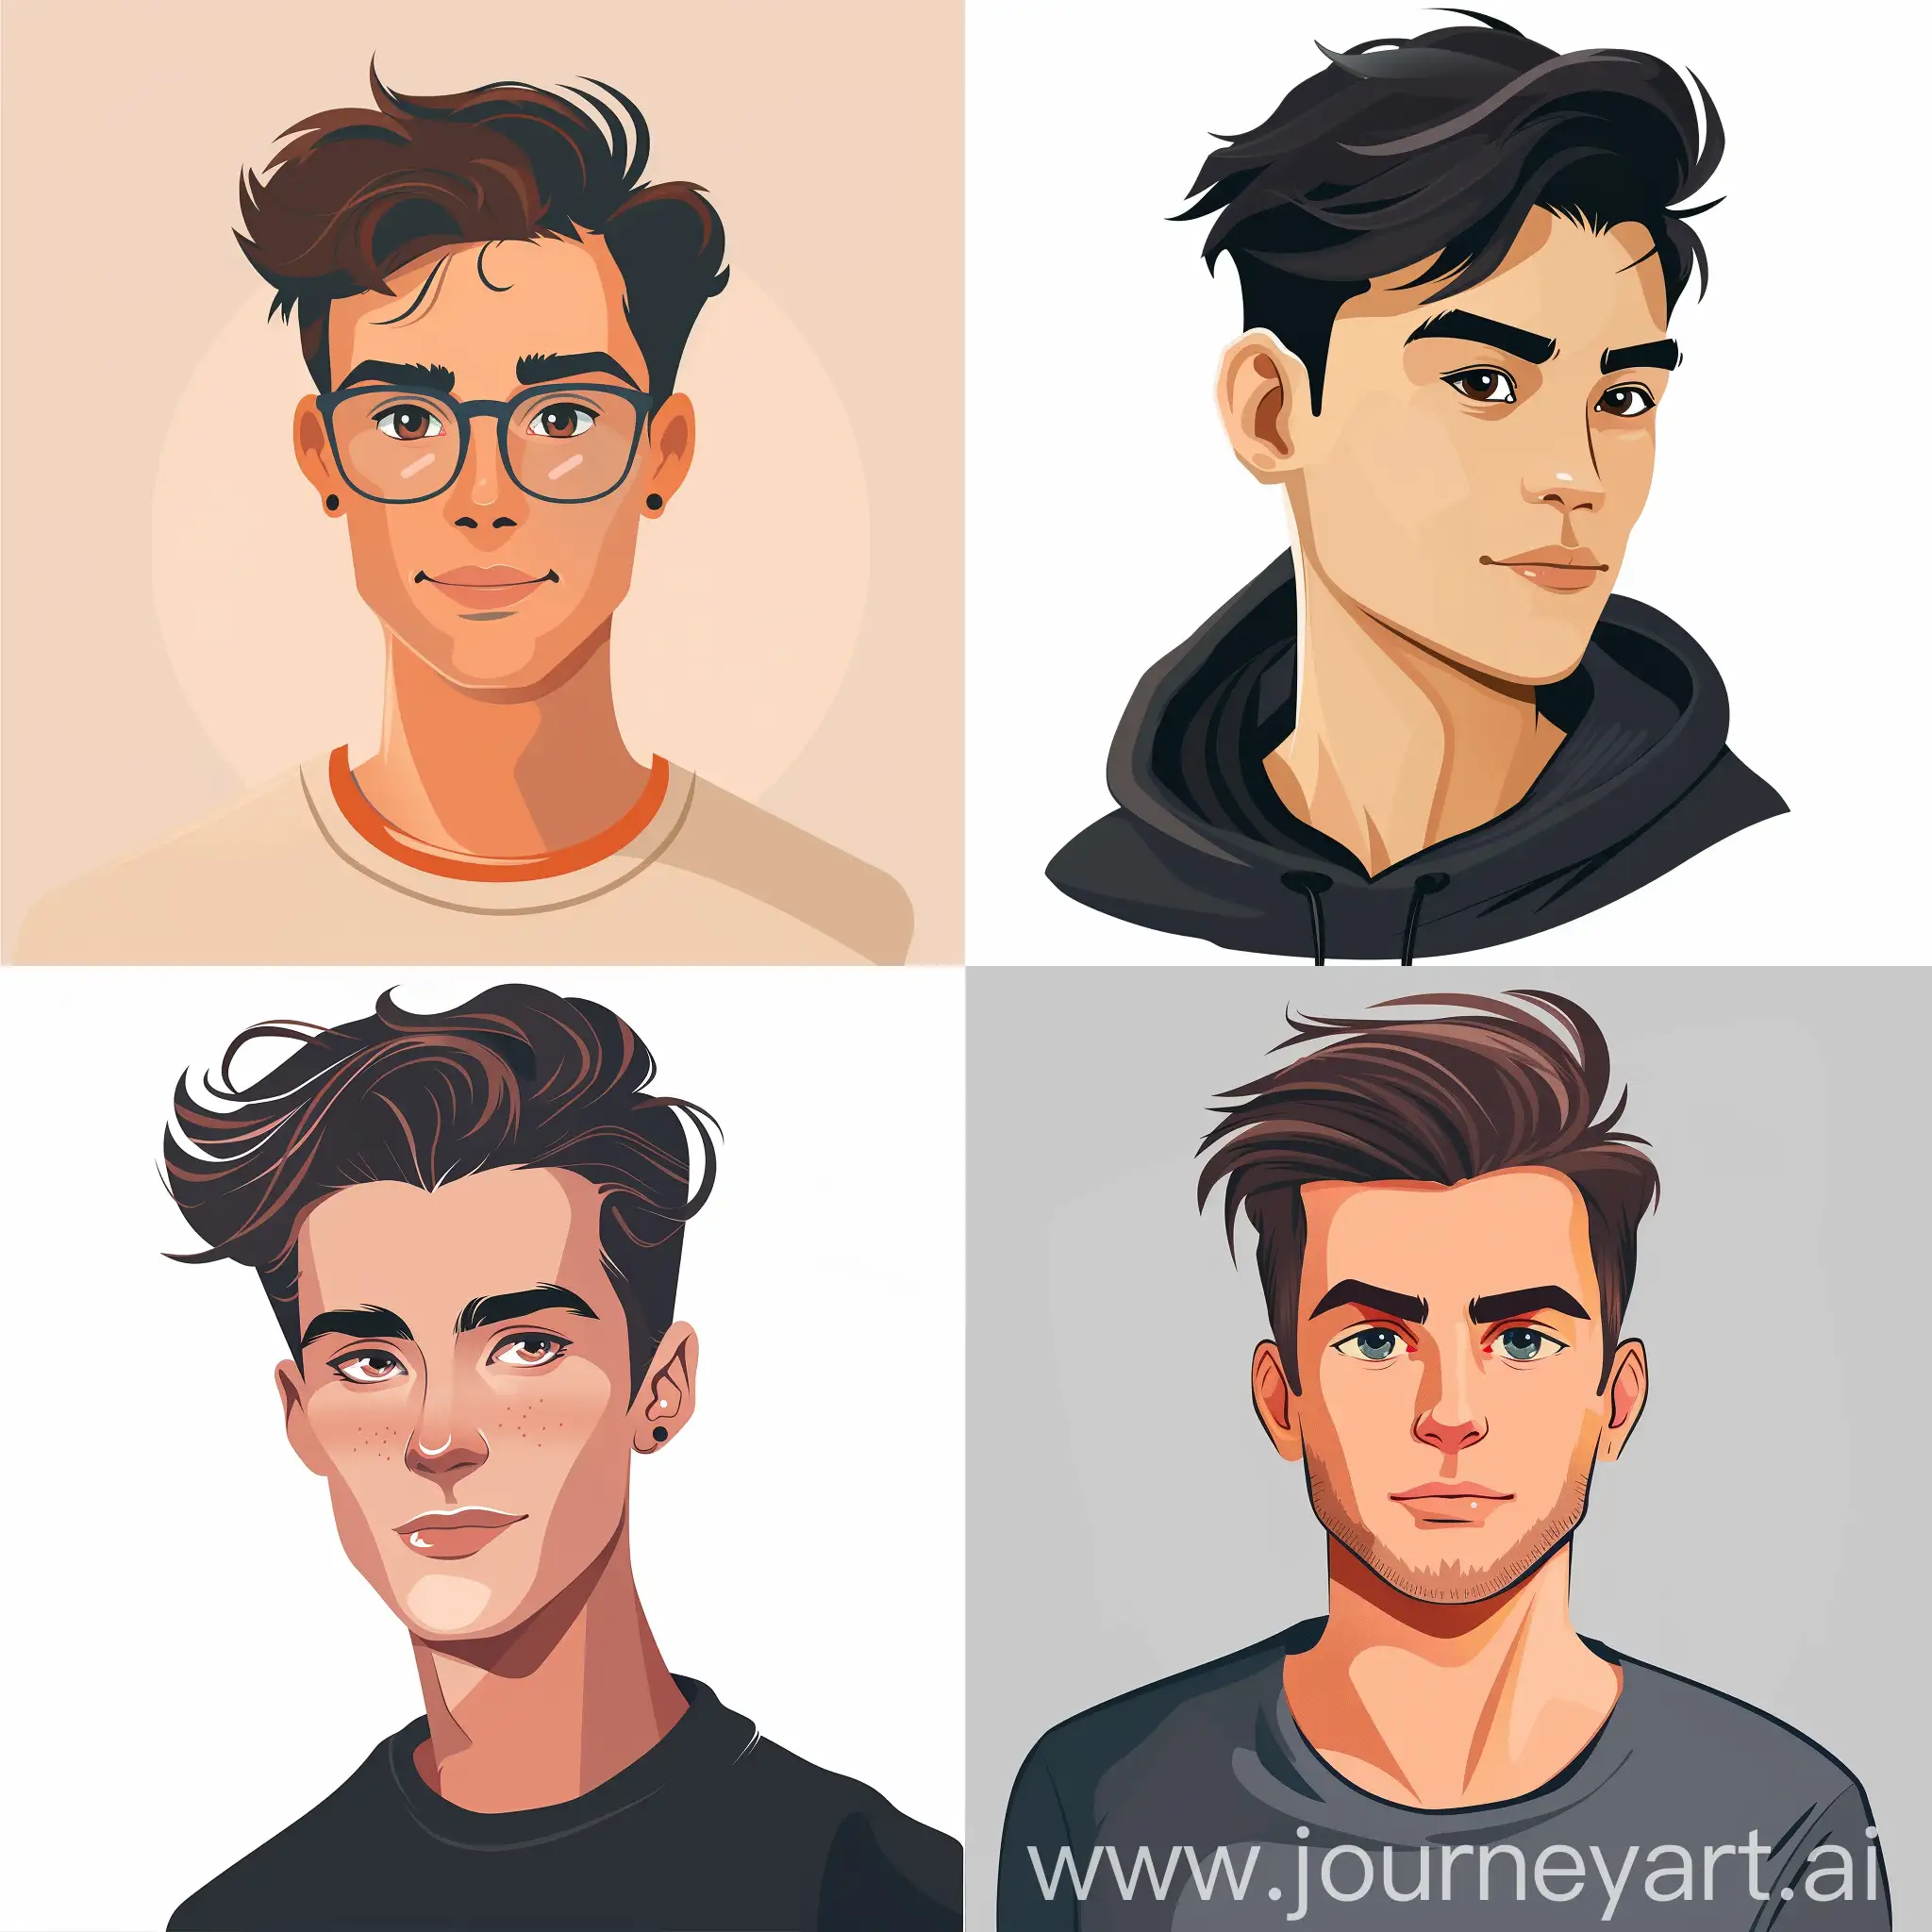 Handsome-TwoDimensional-Male-Avatar-for-Social-Networks